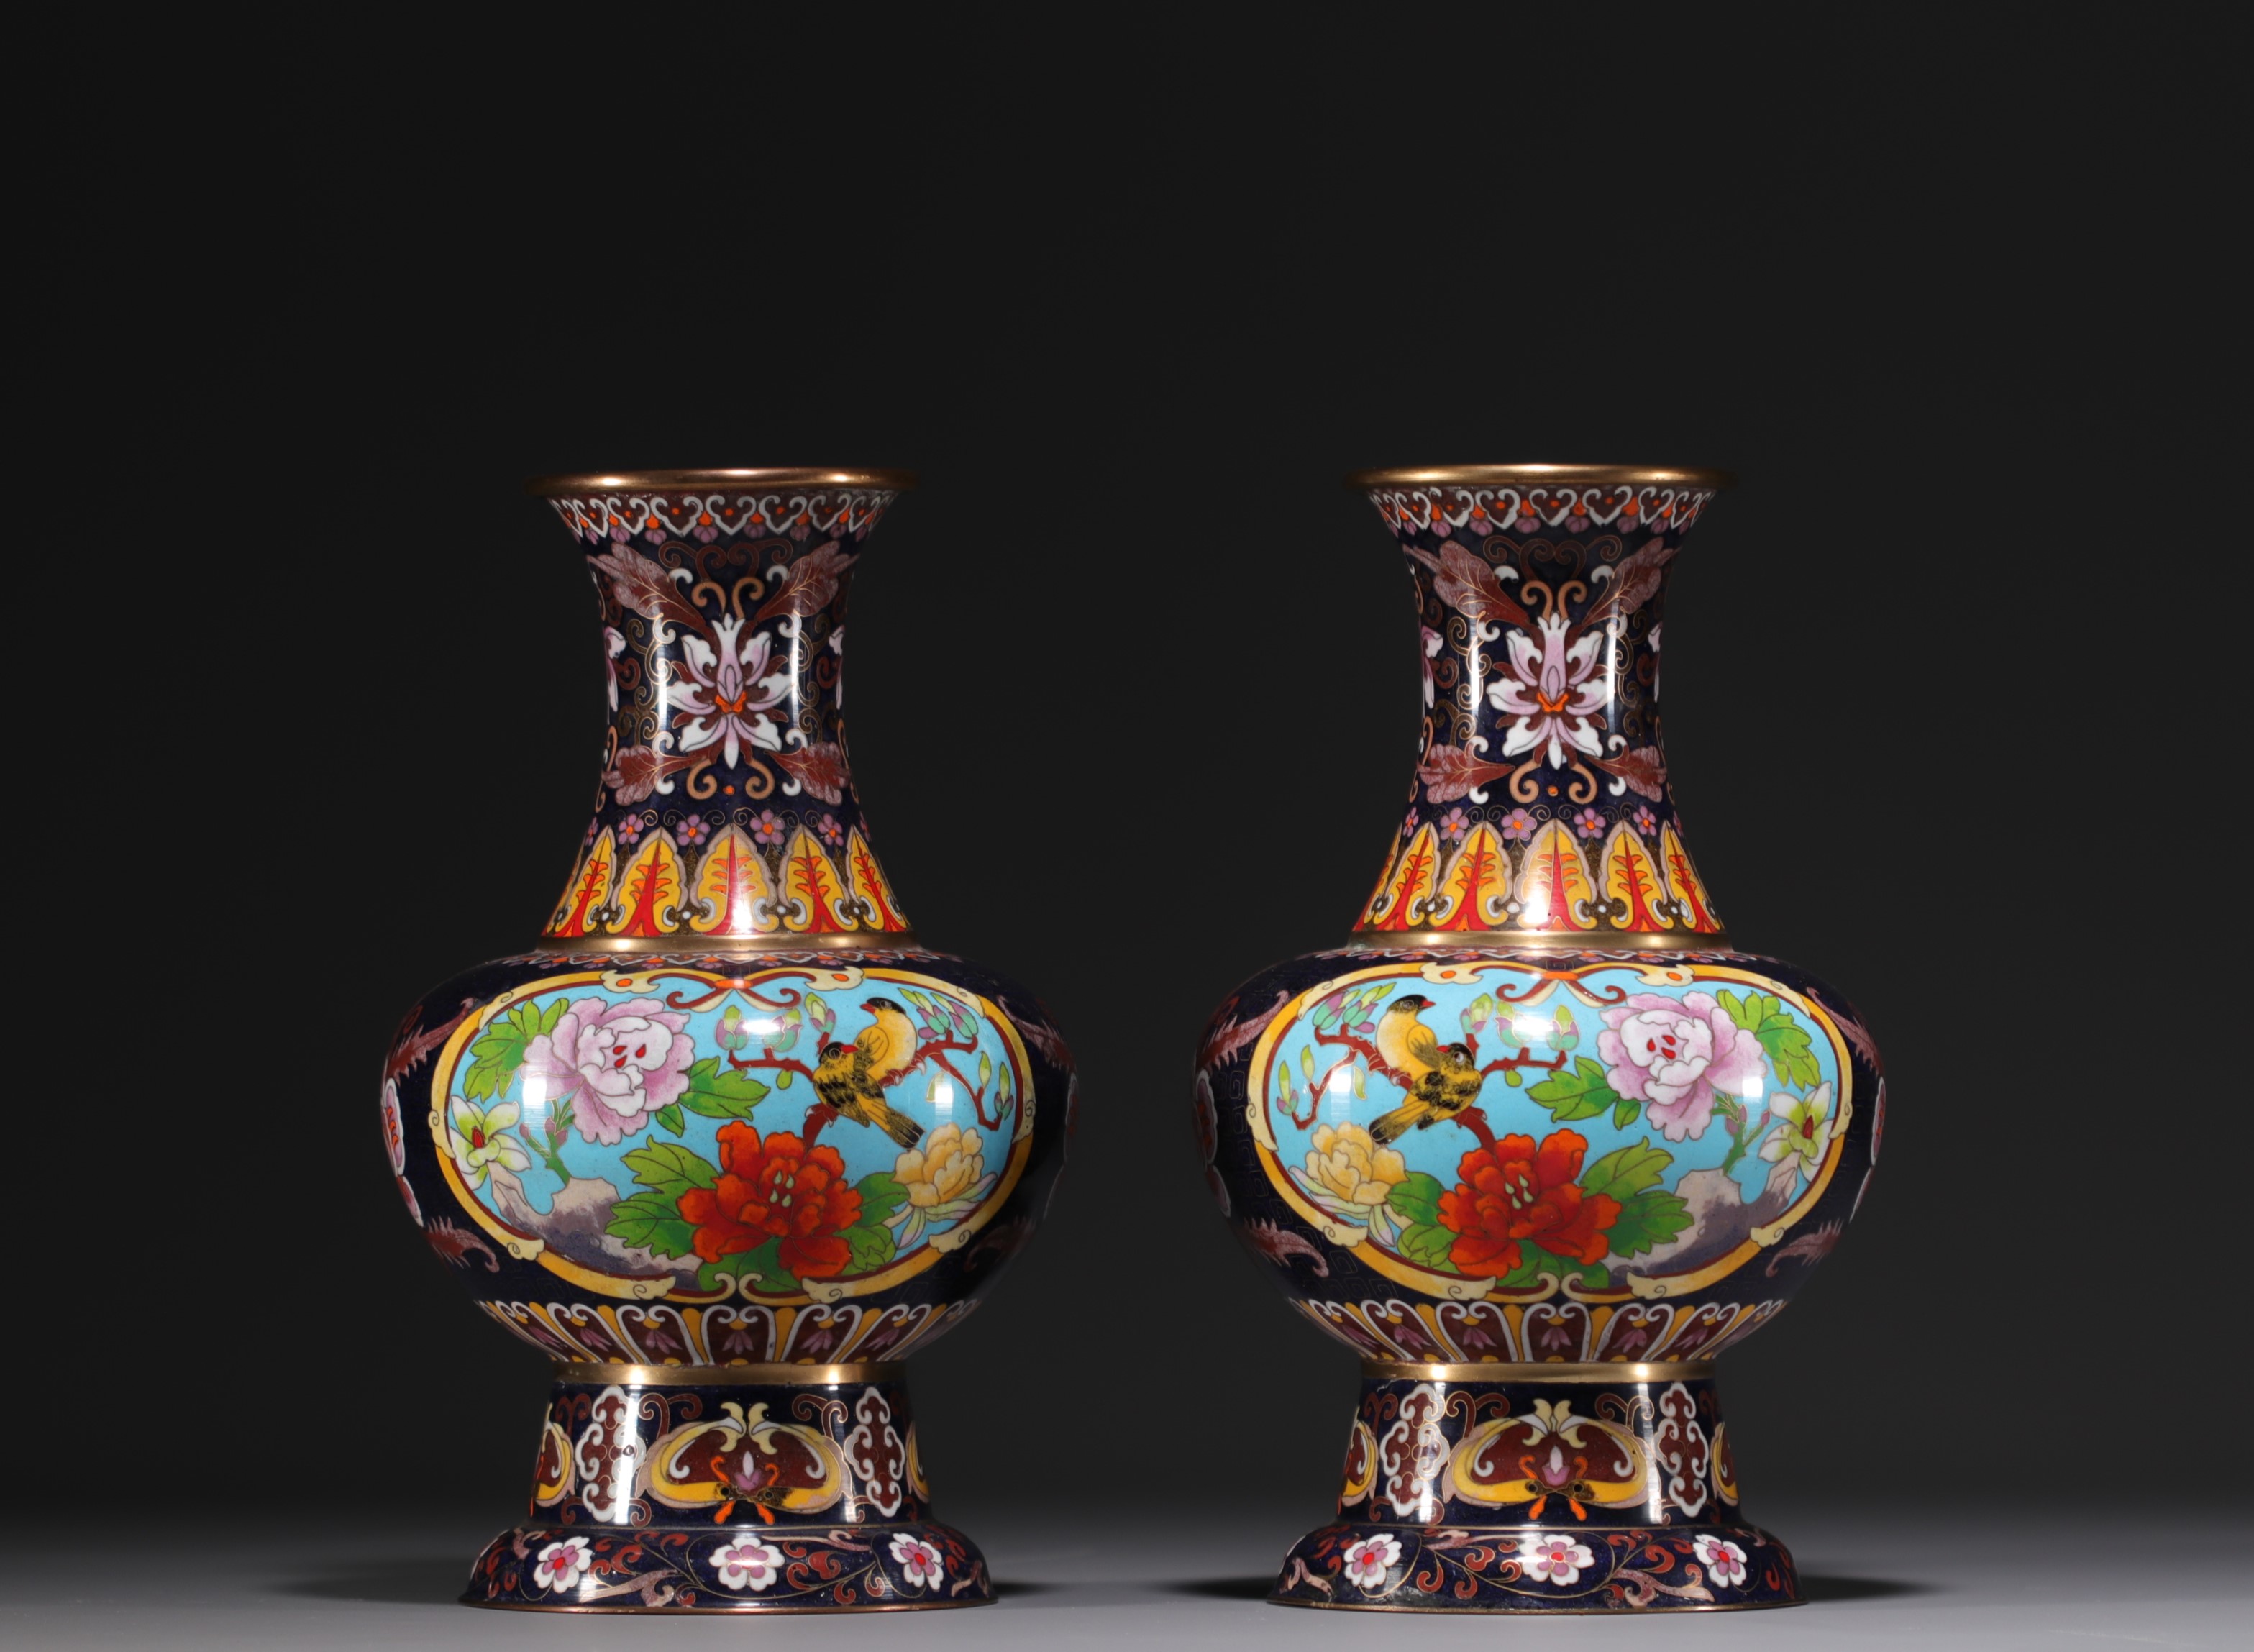 China - A pair of cloisonne enamel vases decorated with flowers and birds, 20th century. - Image 3 of 4